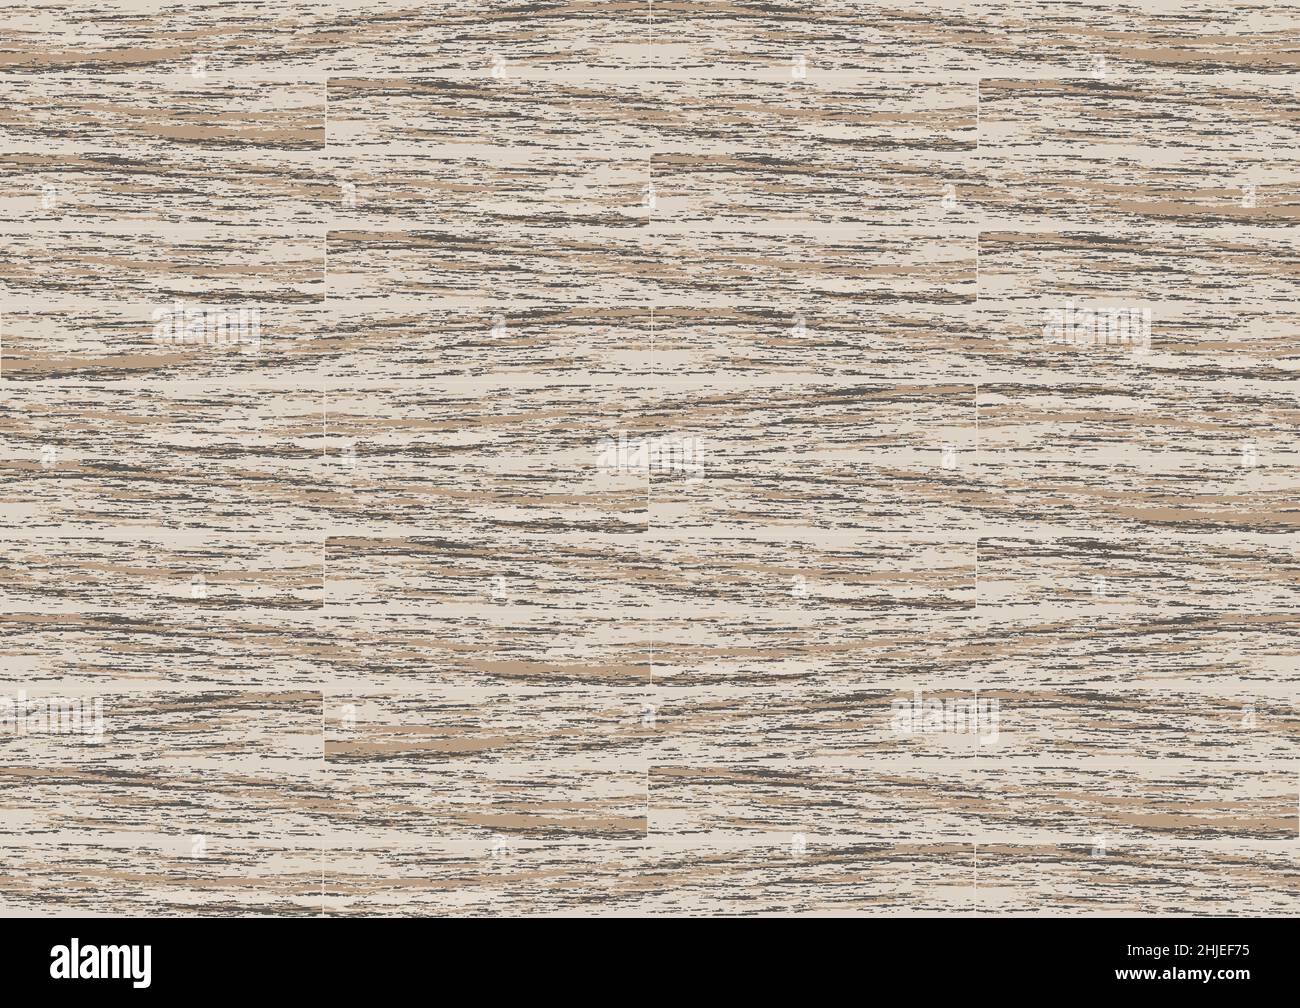 Natural wood grain texture vector. Abstract pattern background. Elegant material timber surface illustration. Floor, wall, furniture interior design t Stock Vector